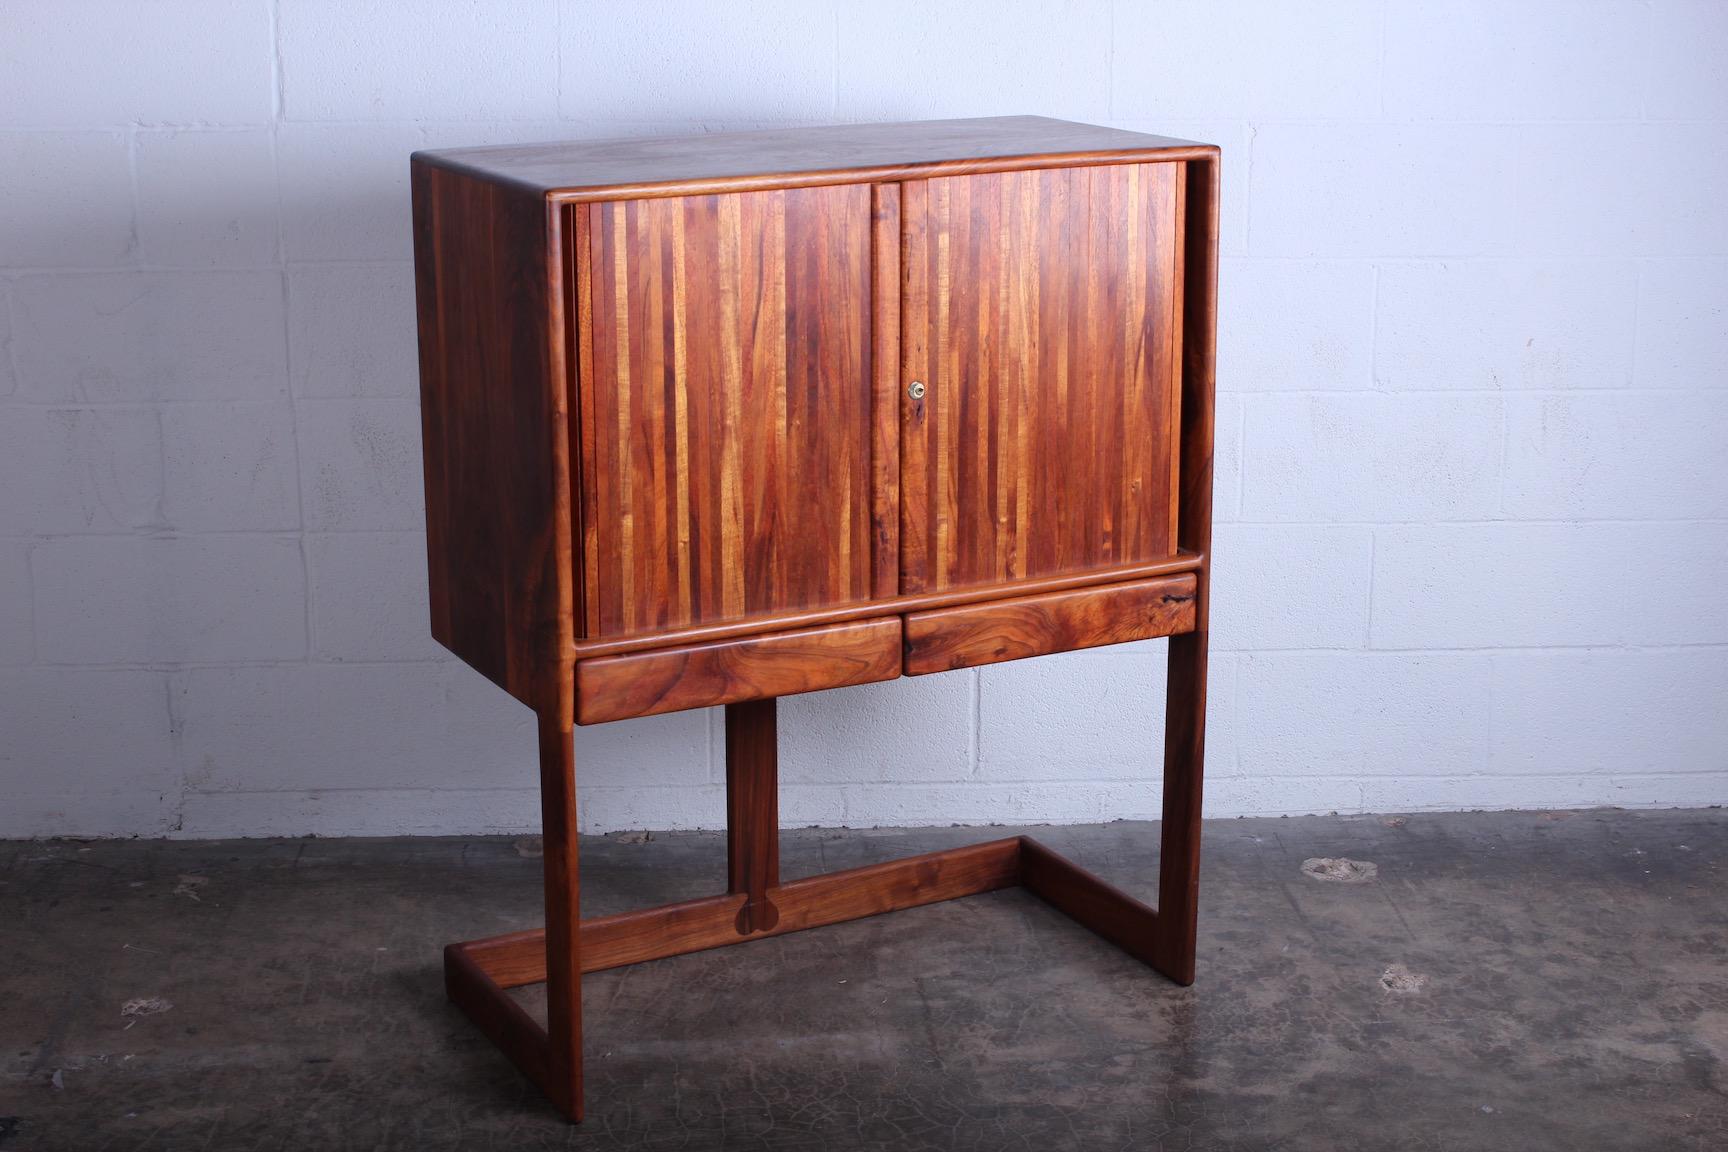 A beautifully crafted walnut tambour door cabinet with interior drawers. Made by Robert and Joanne Herzog, 1970s, California.